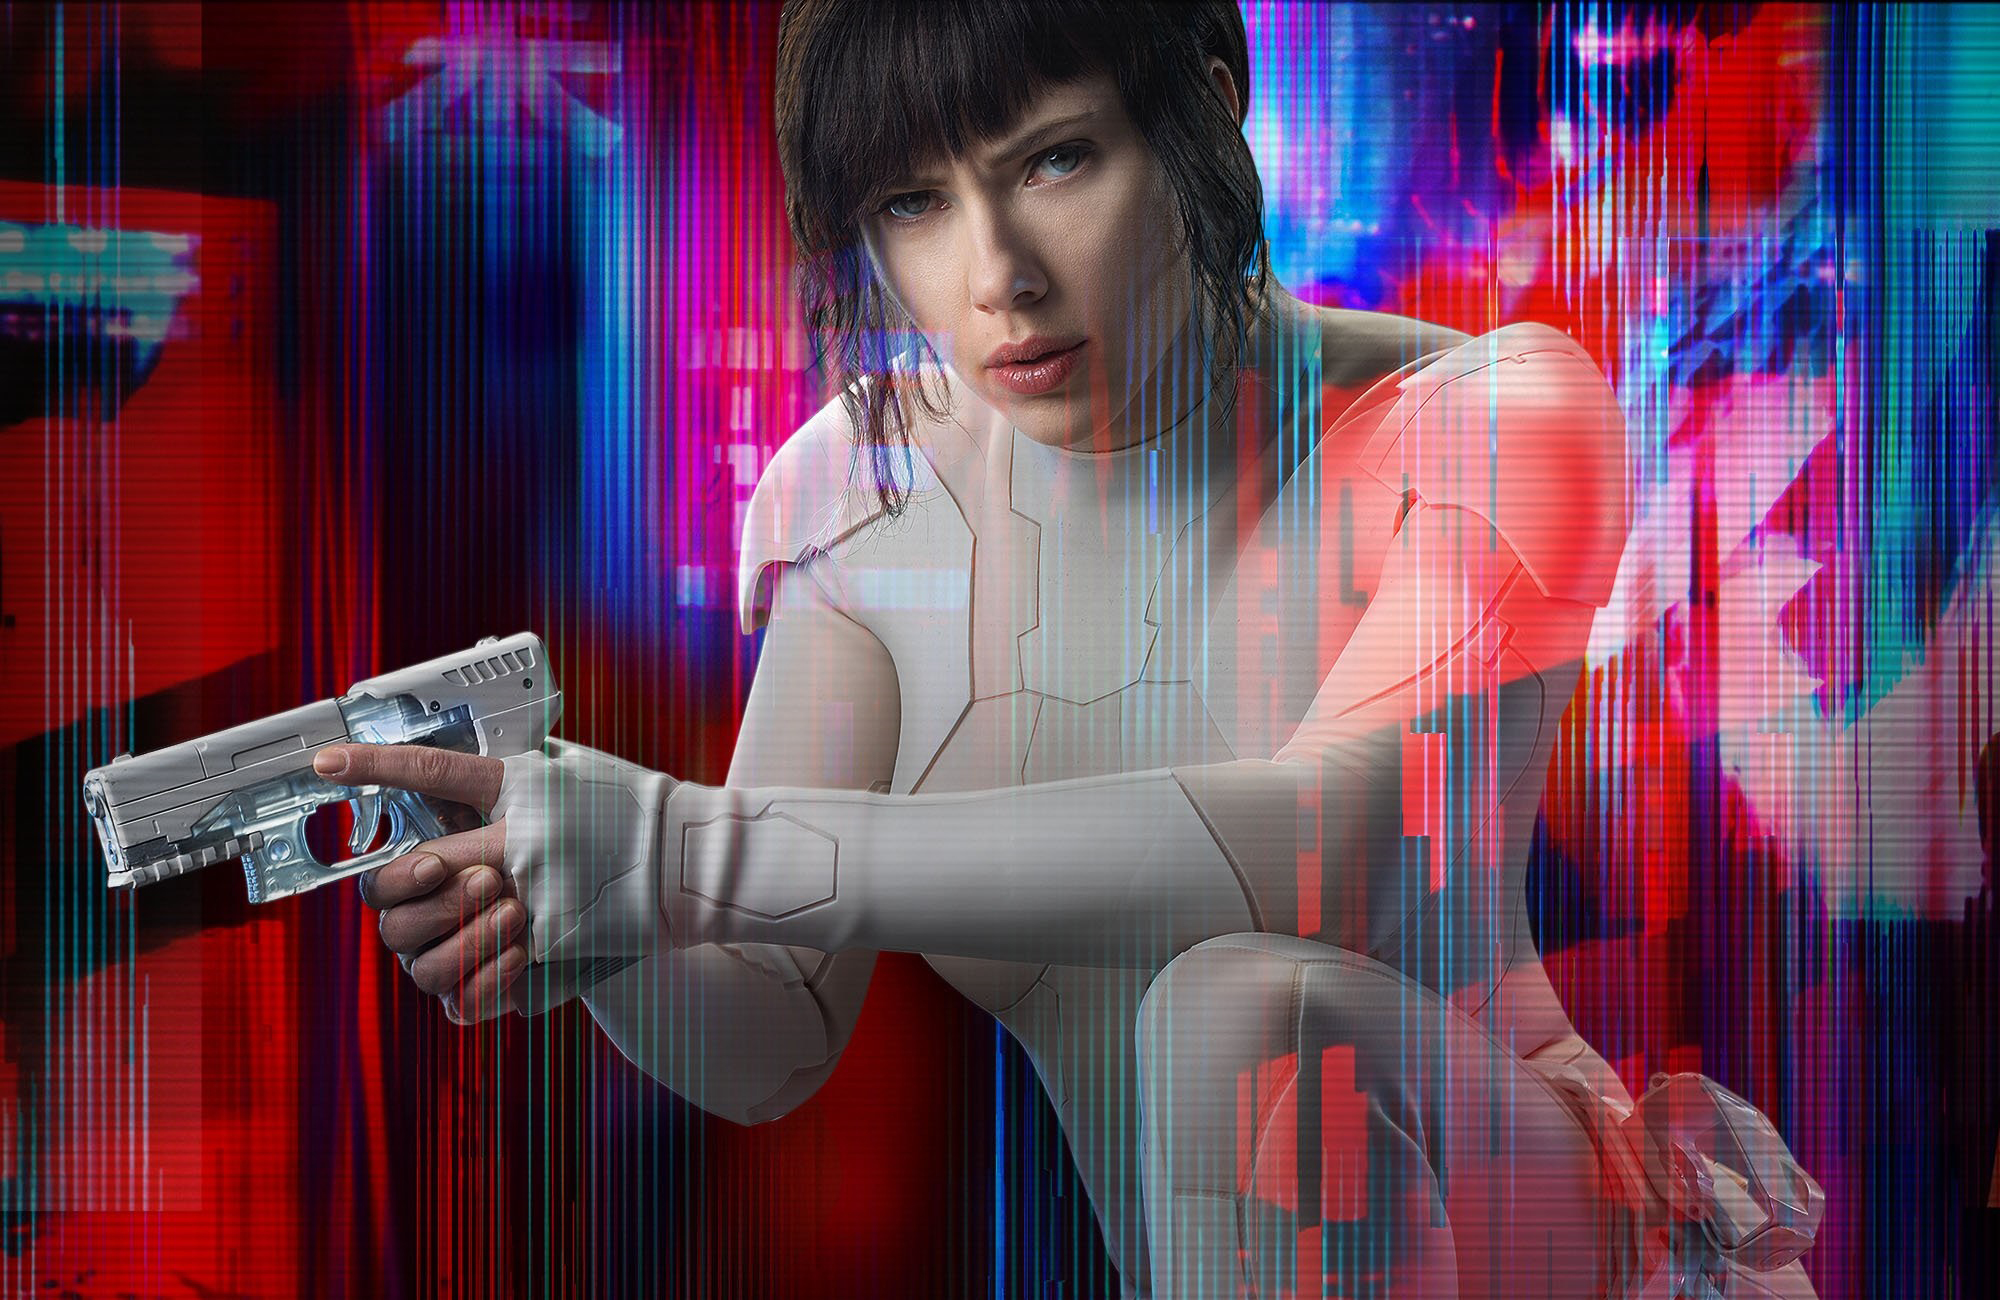 ghost in the shell wallpaper hd,technology,black hair,photography,performance,singer